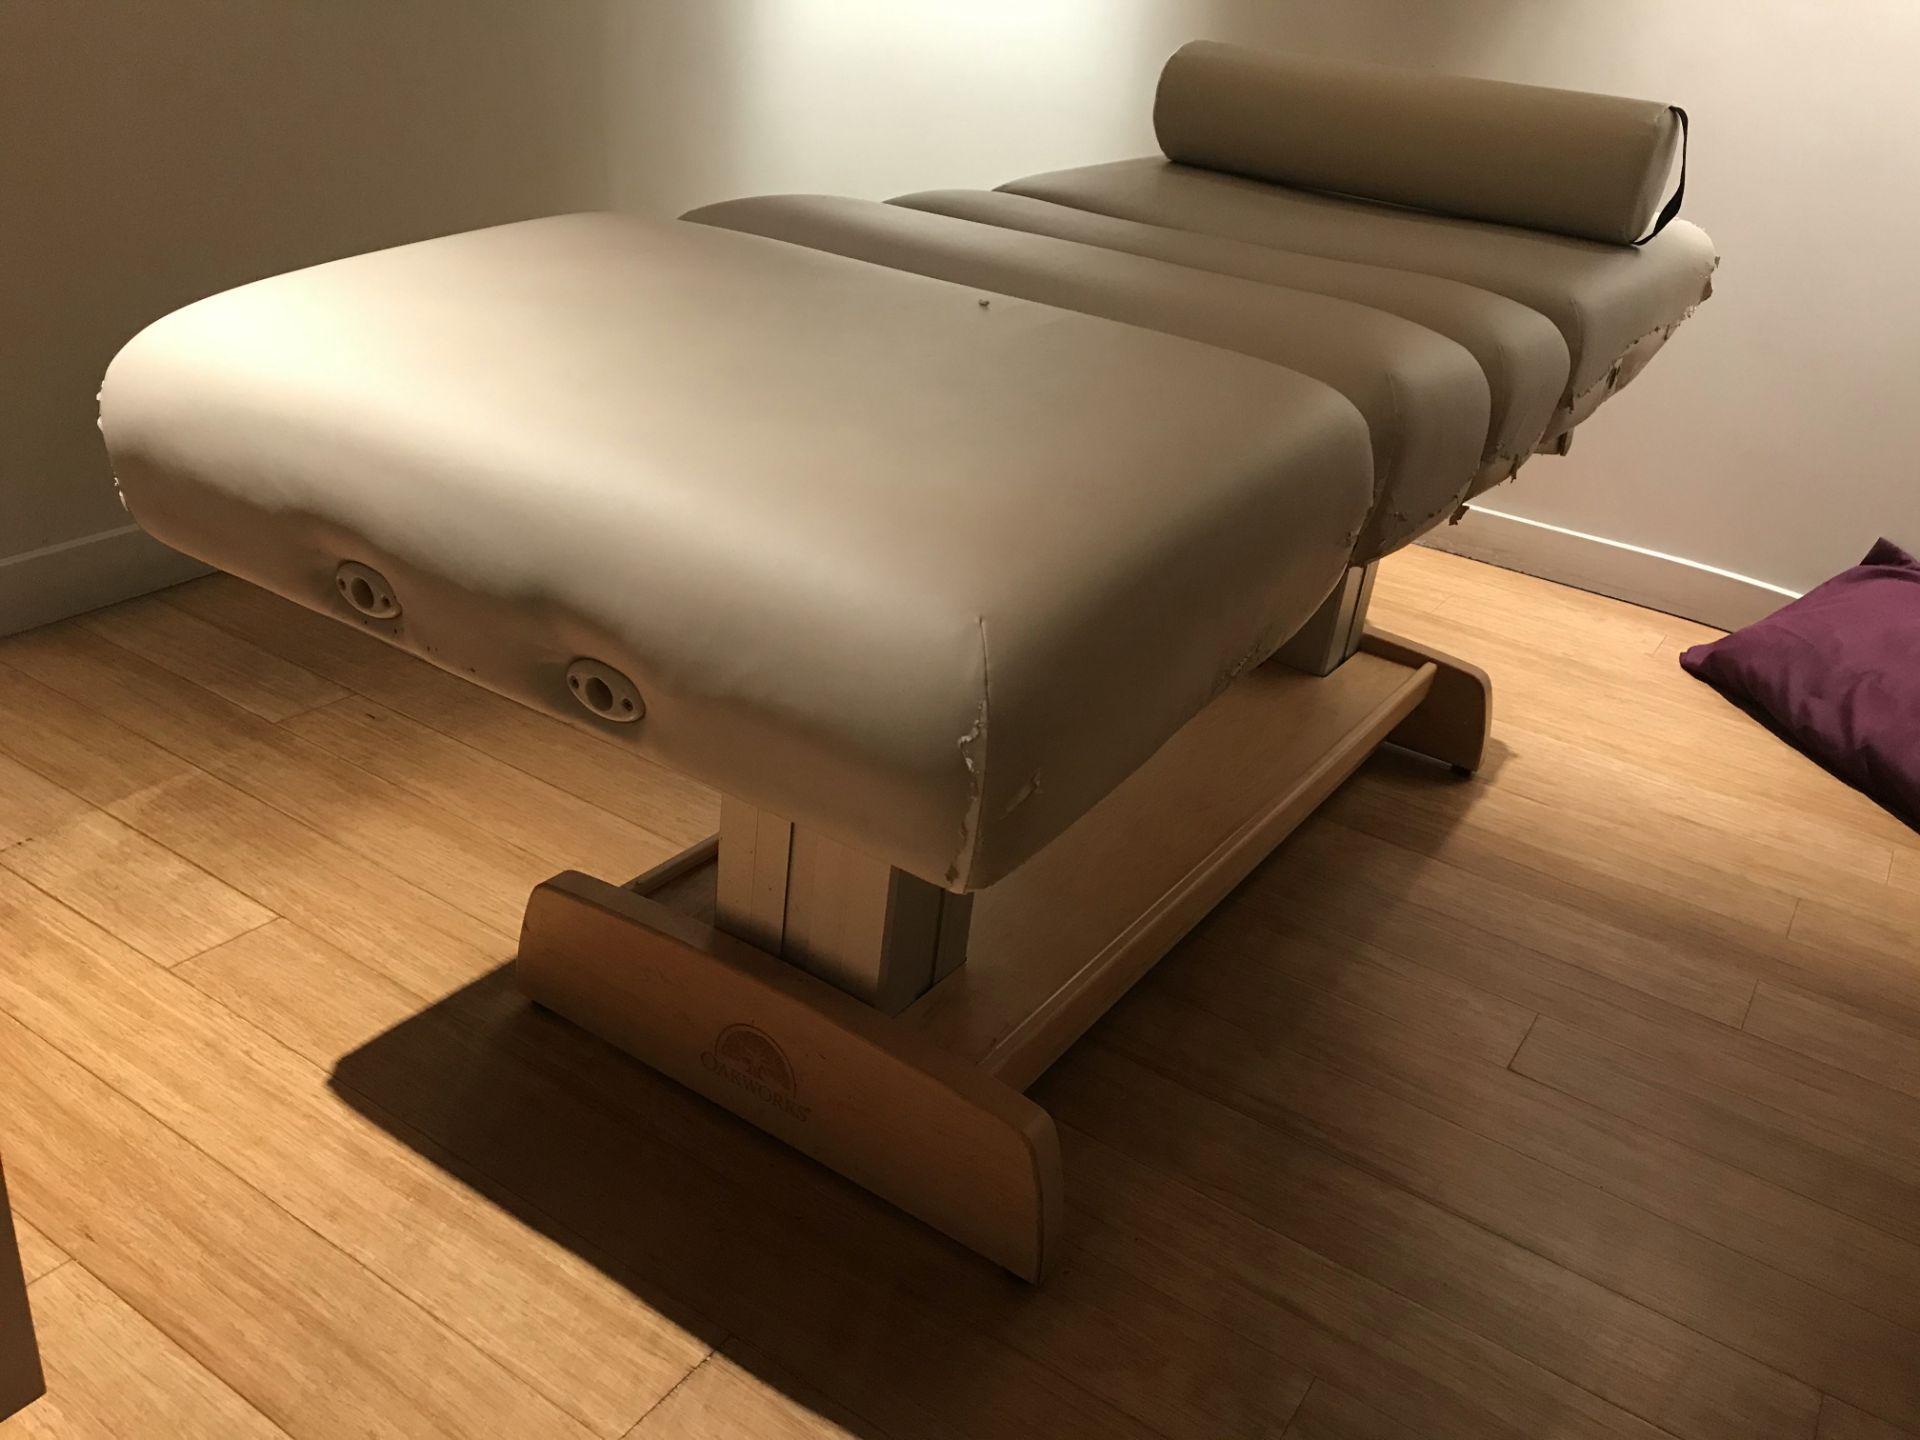 1 x Oakworks Clinician Electric-Hydraulic Massage Table With Footpedal and Linak HBWO Remote Control - Bild 6 aus 11